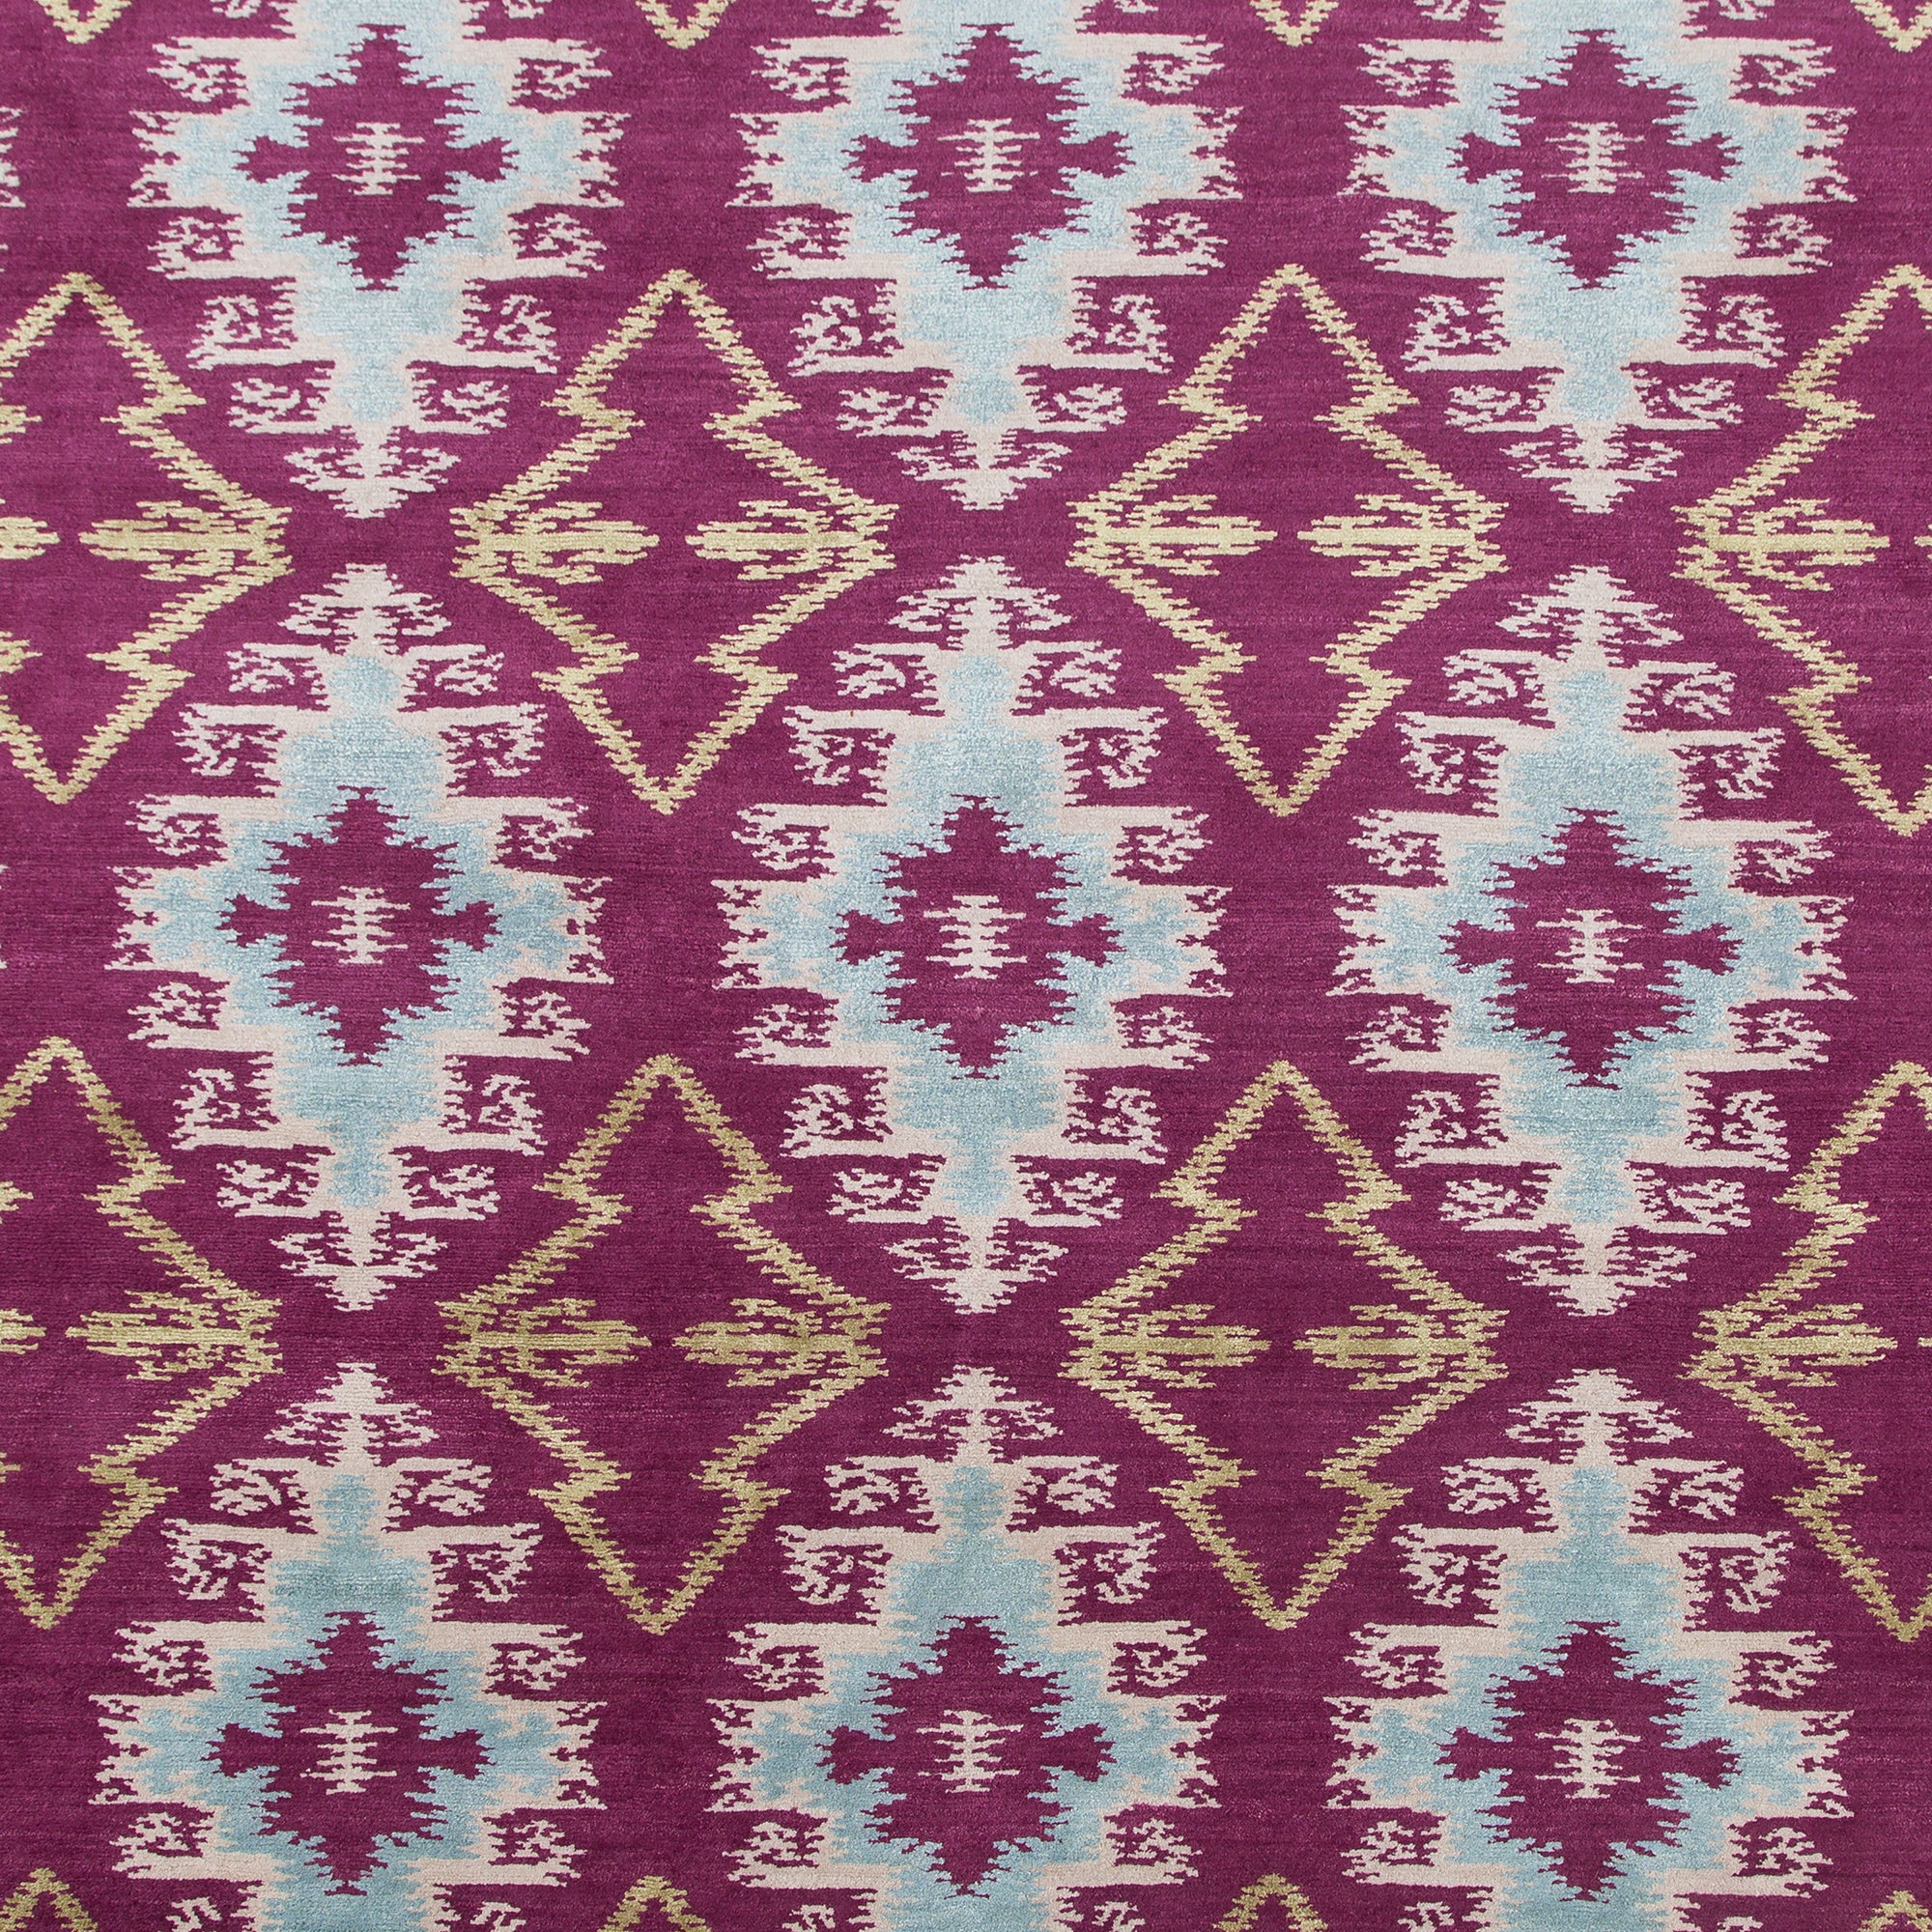 Full Size Anna Ikat rug in Cranberry features an ikat inspired pattern of diamonds in blue and white with pale lime green accents on a magenta field